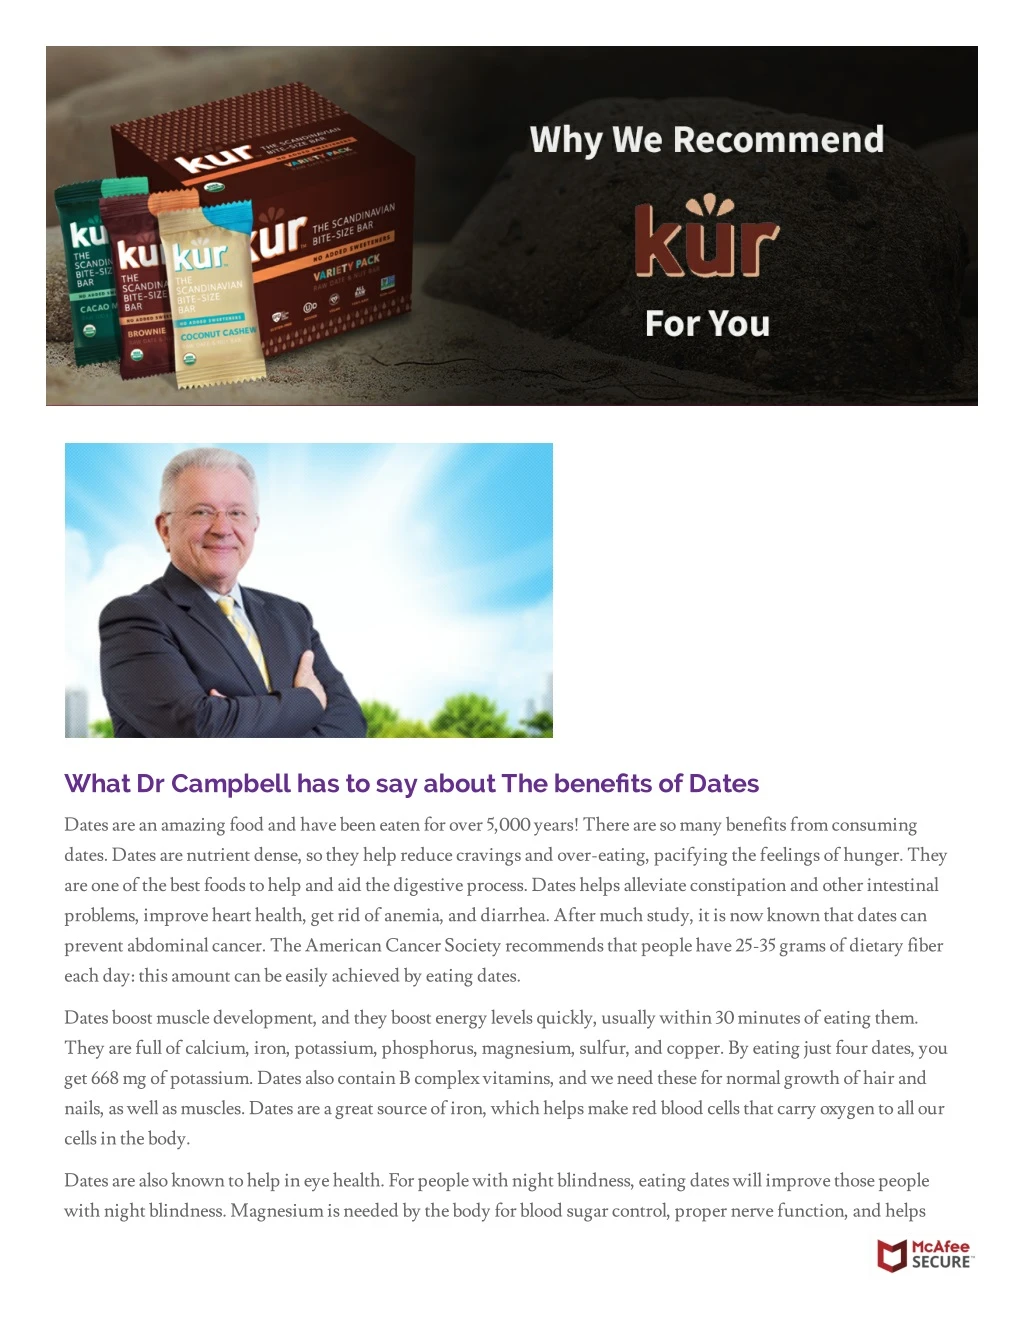 what dr campbell has to say about the benefits